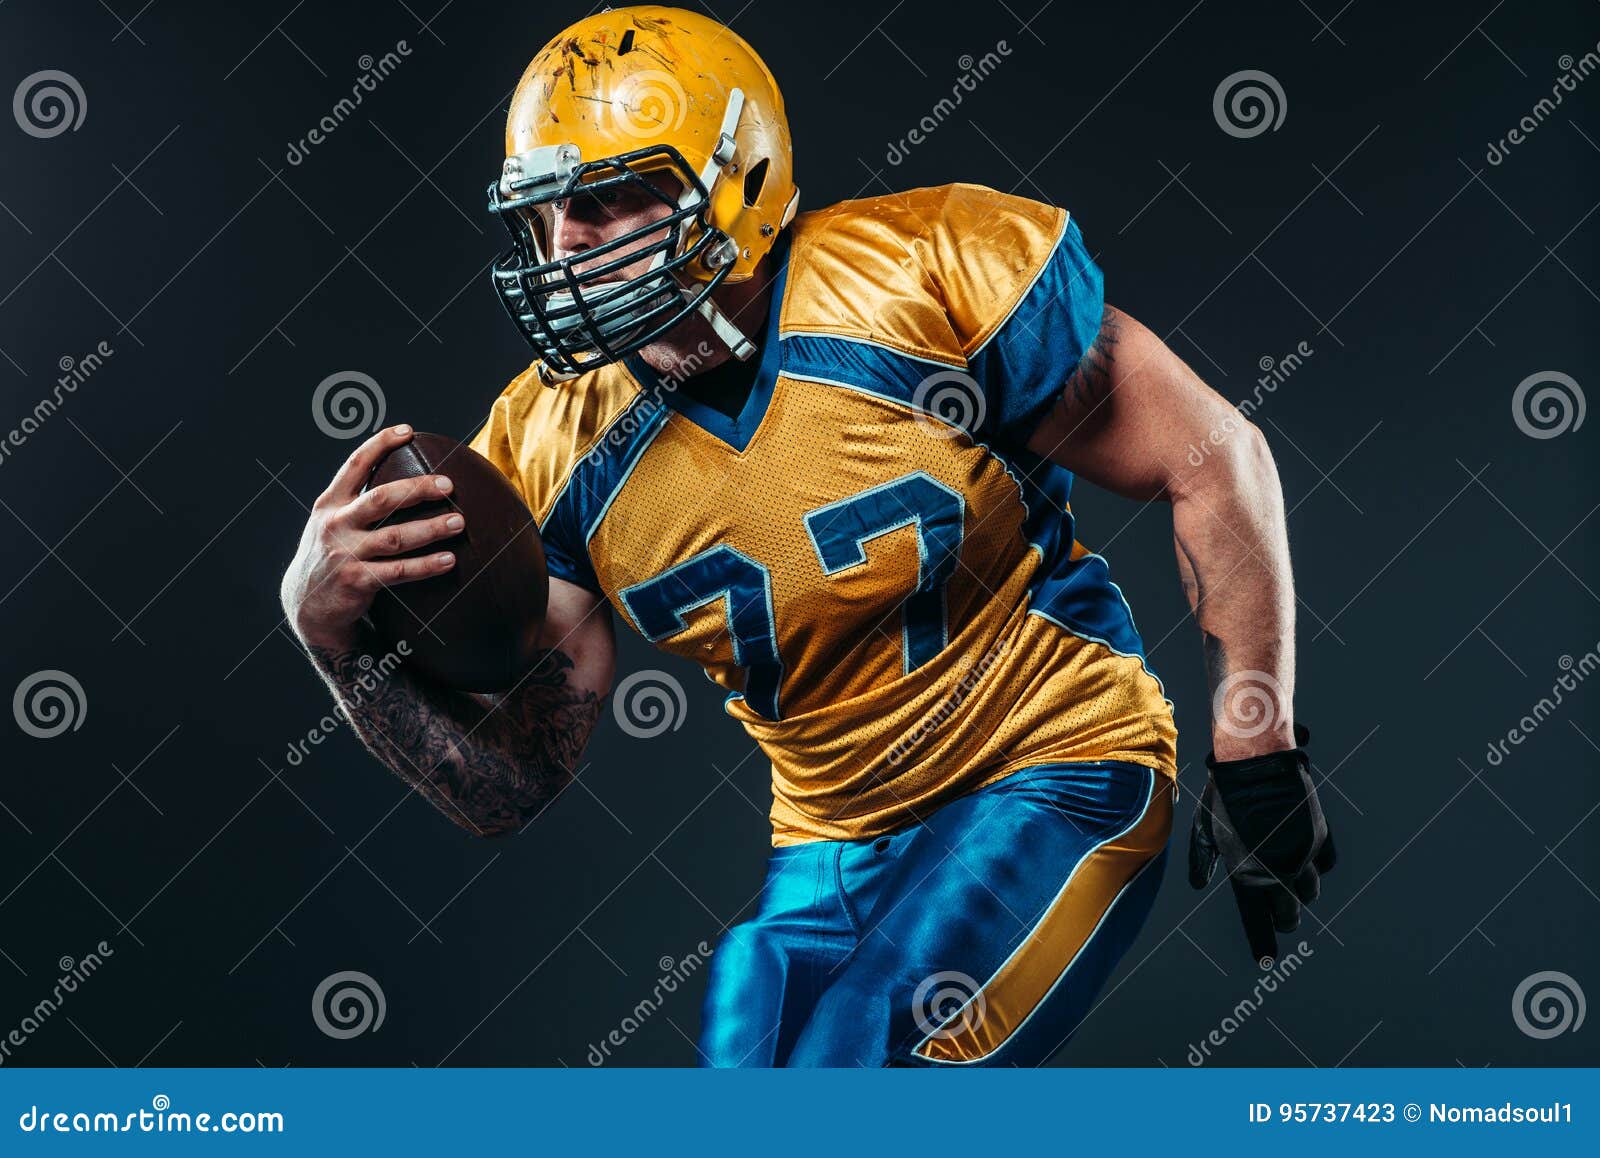 american football offensive player, nfl